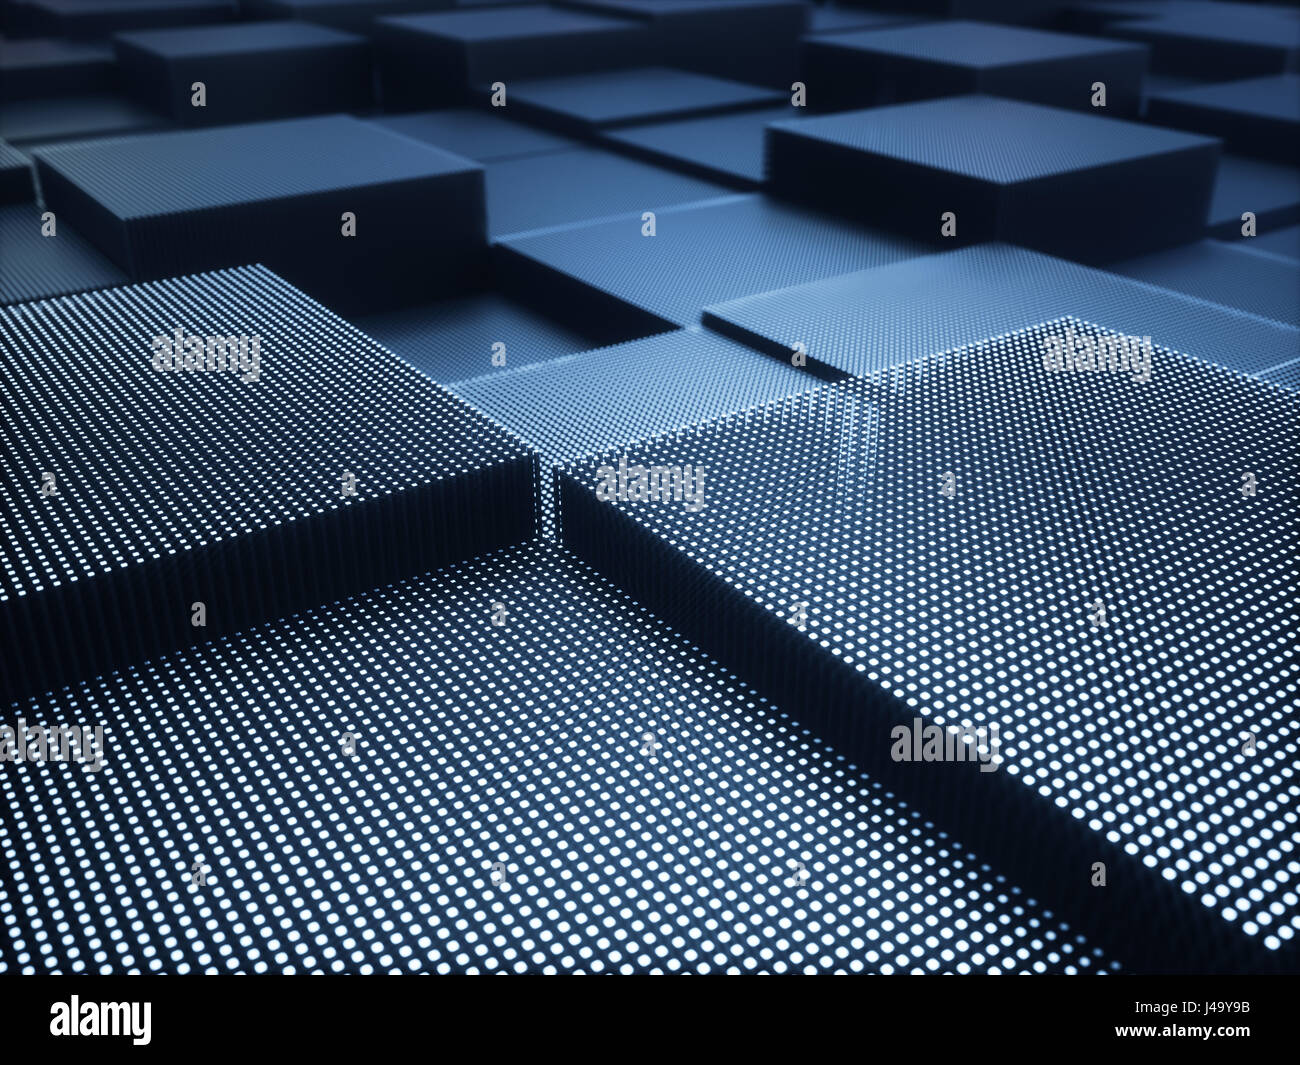 3D illustration. Abstract background of metallic structure. Stock Photo